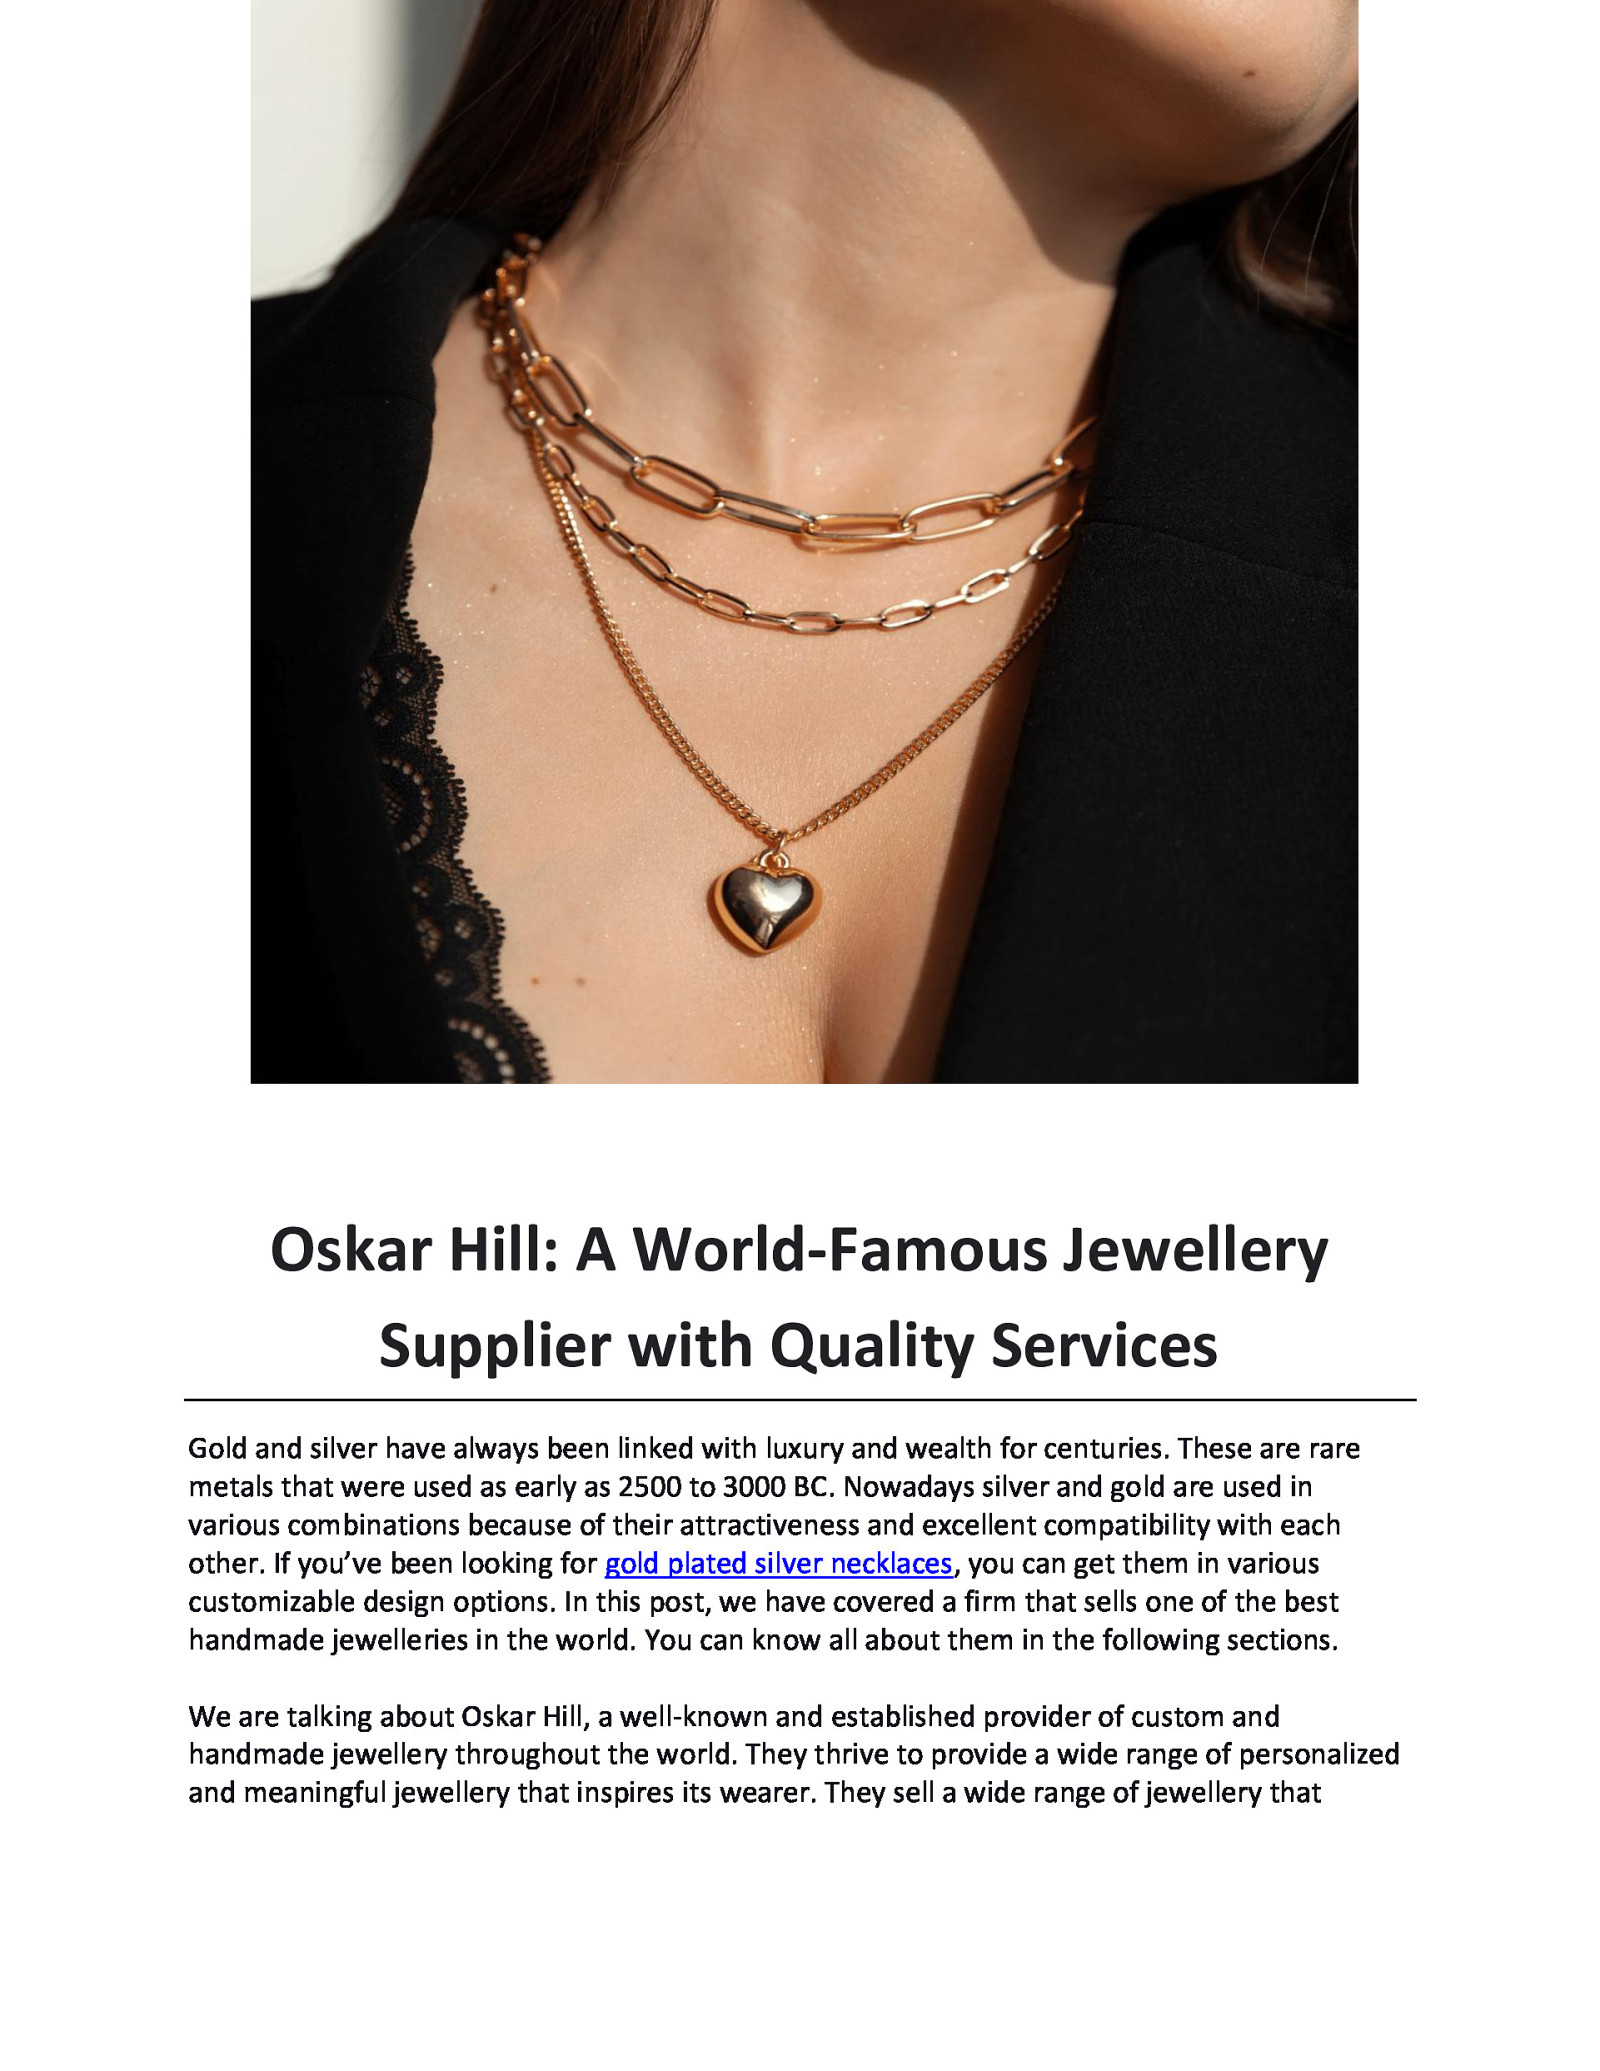 Oskar Hill: A World-Famous Jewellery Supplier with Quality Services